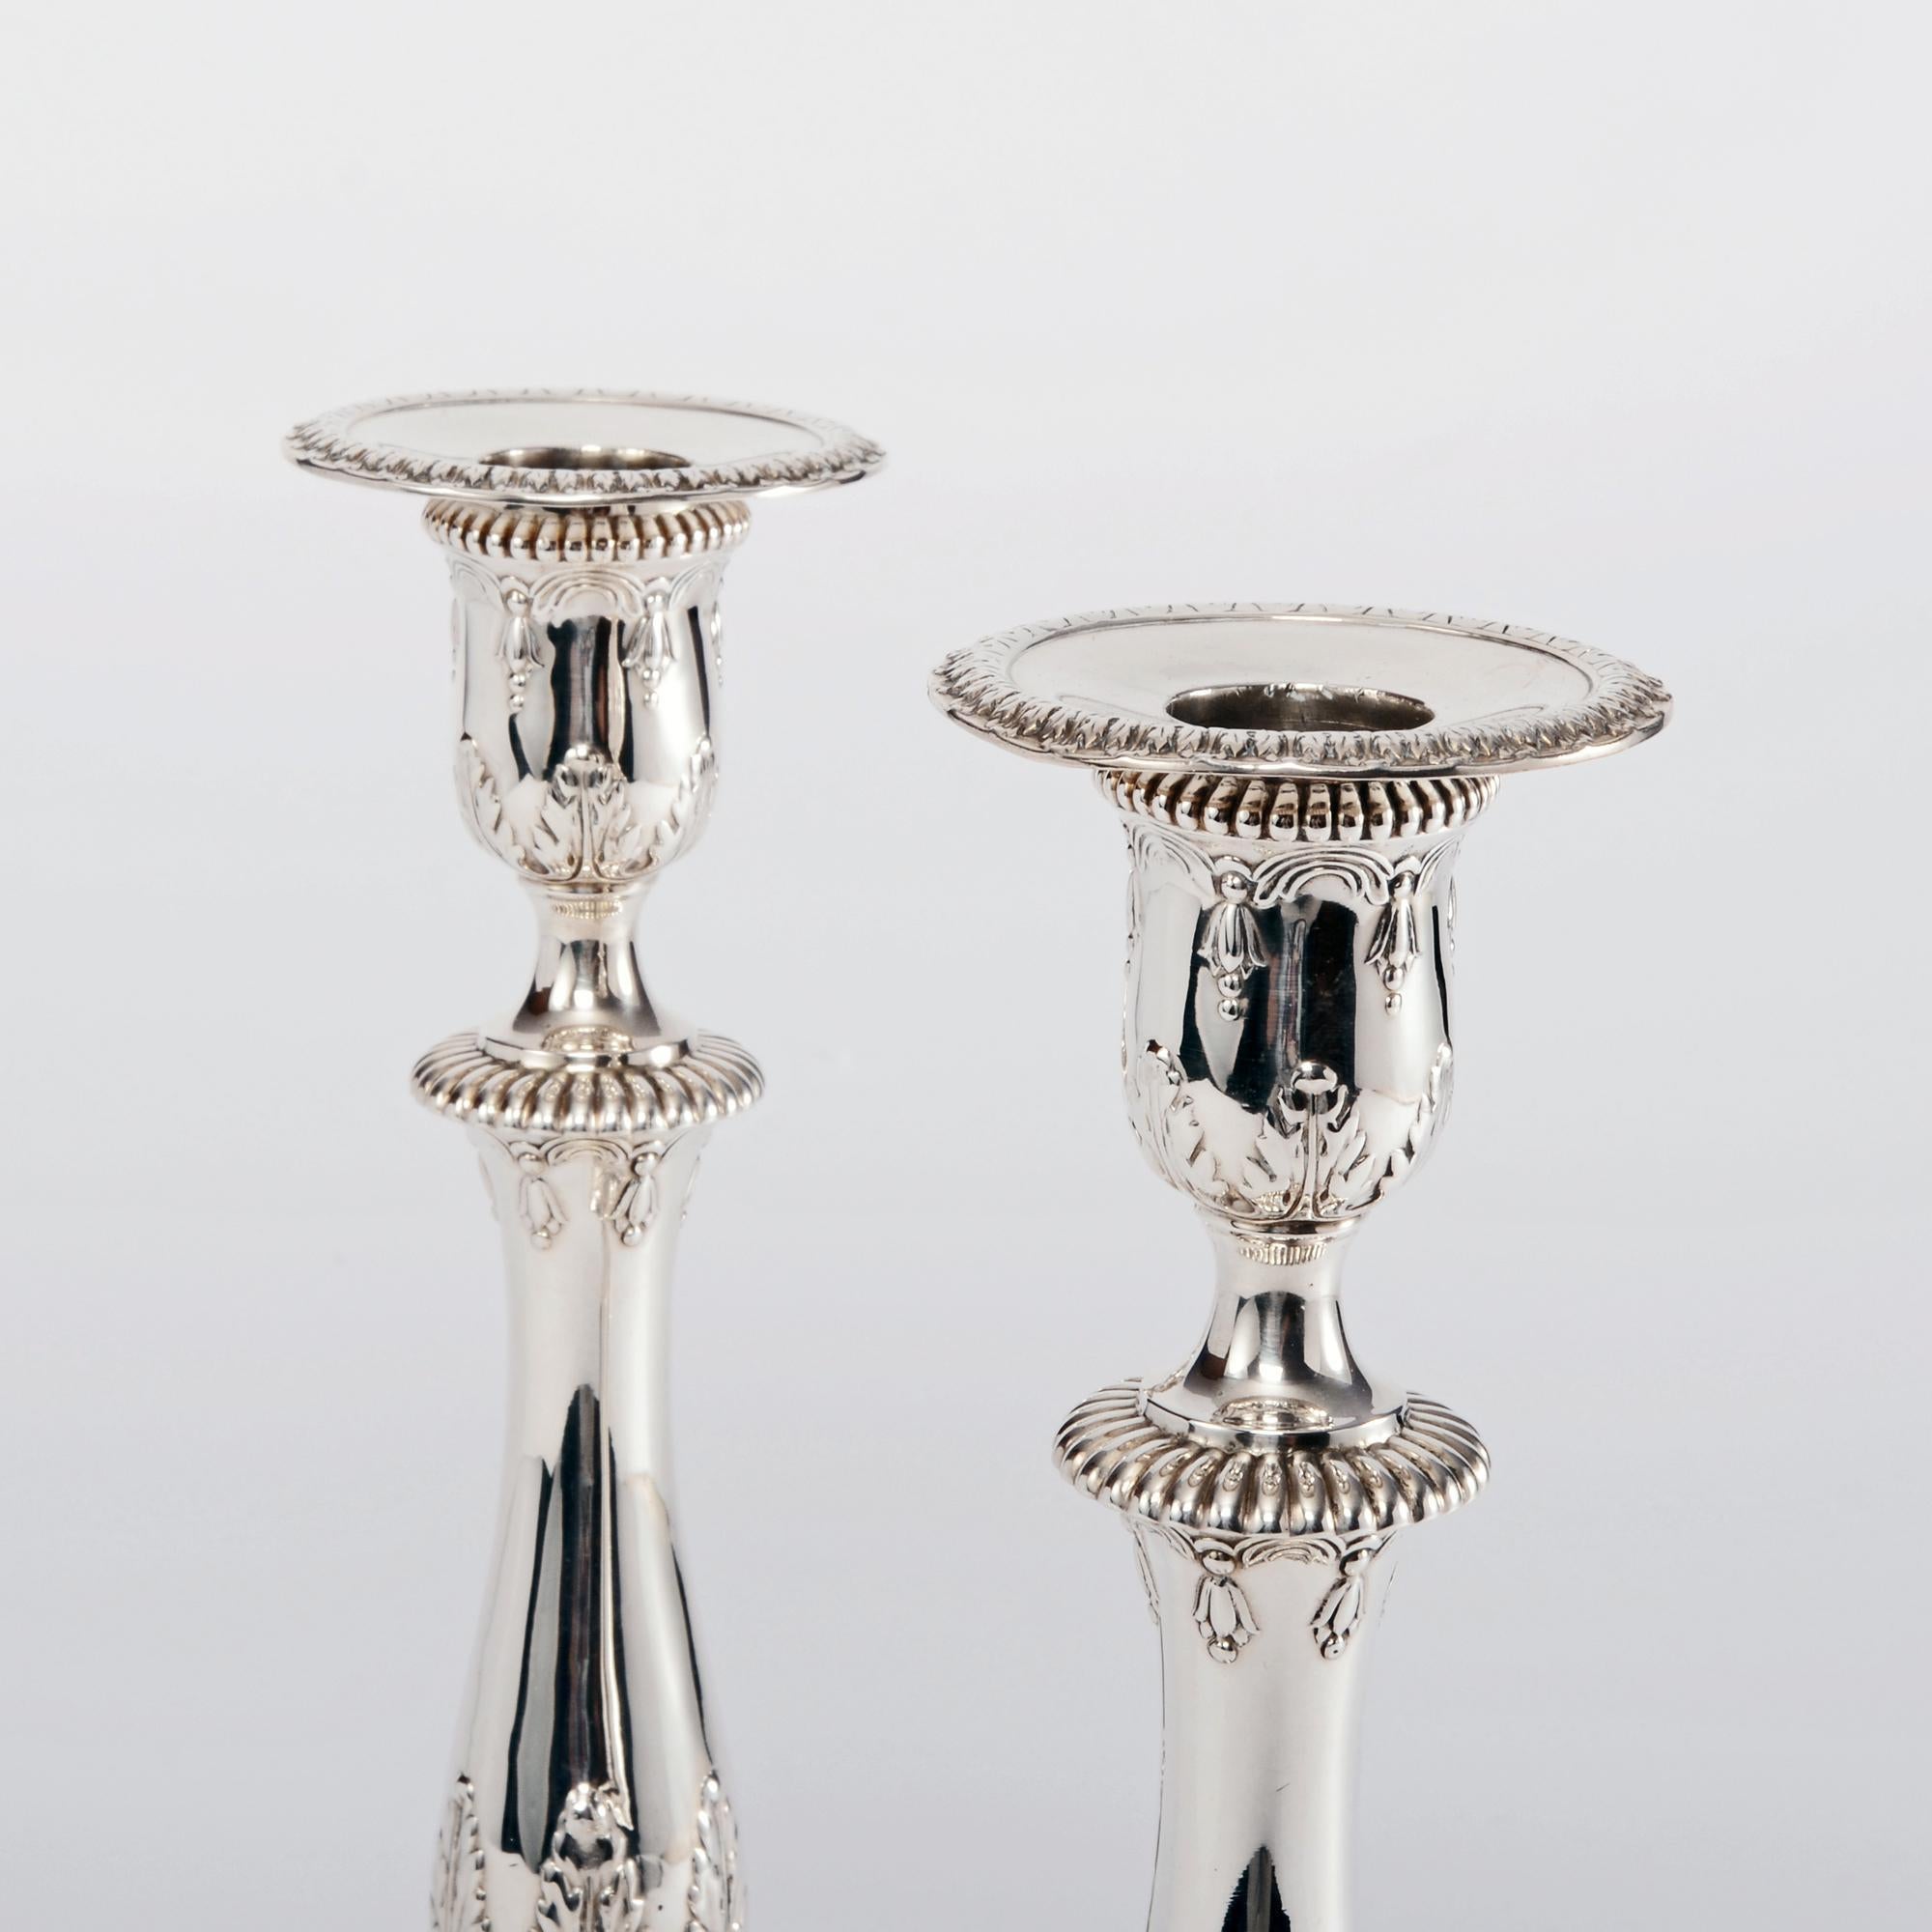 Fine pair of Edwardian silver candlesticks in the Georgian style that was typical of the late 18th century. The square bases are decorated with acanthus leaves, while the spreading fluted stems taper elegantly and also feature fluted and acanthus